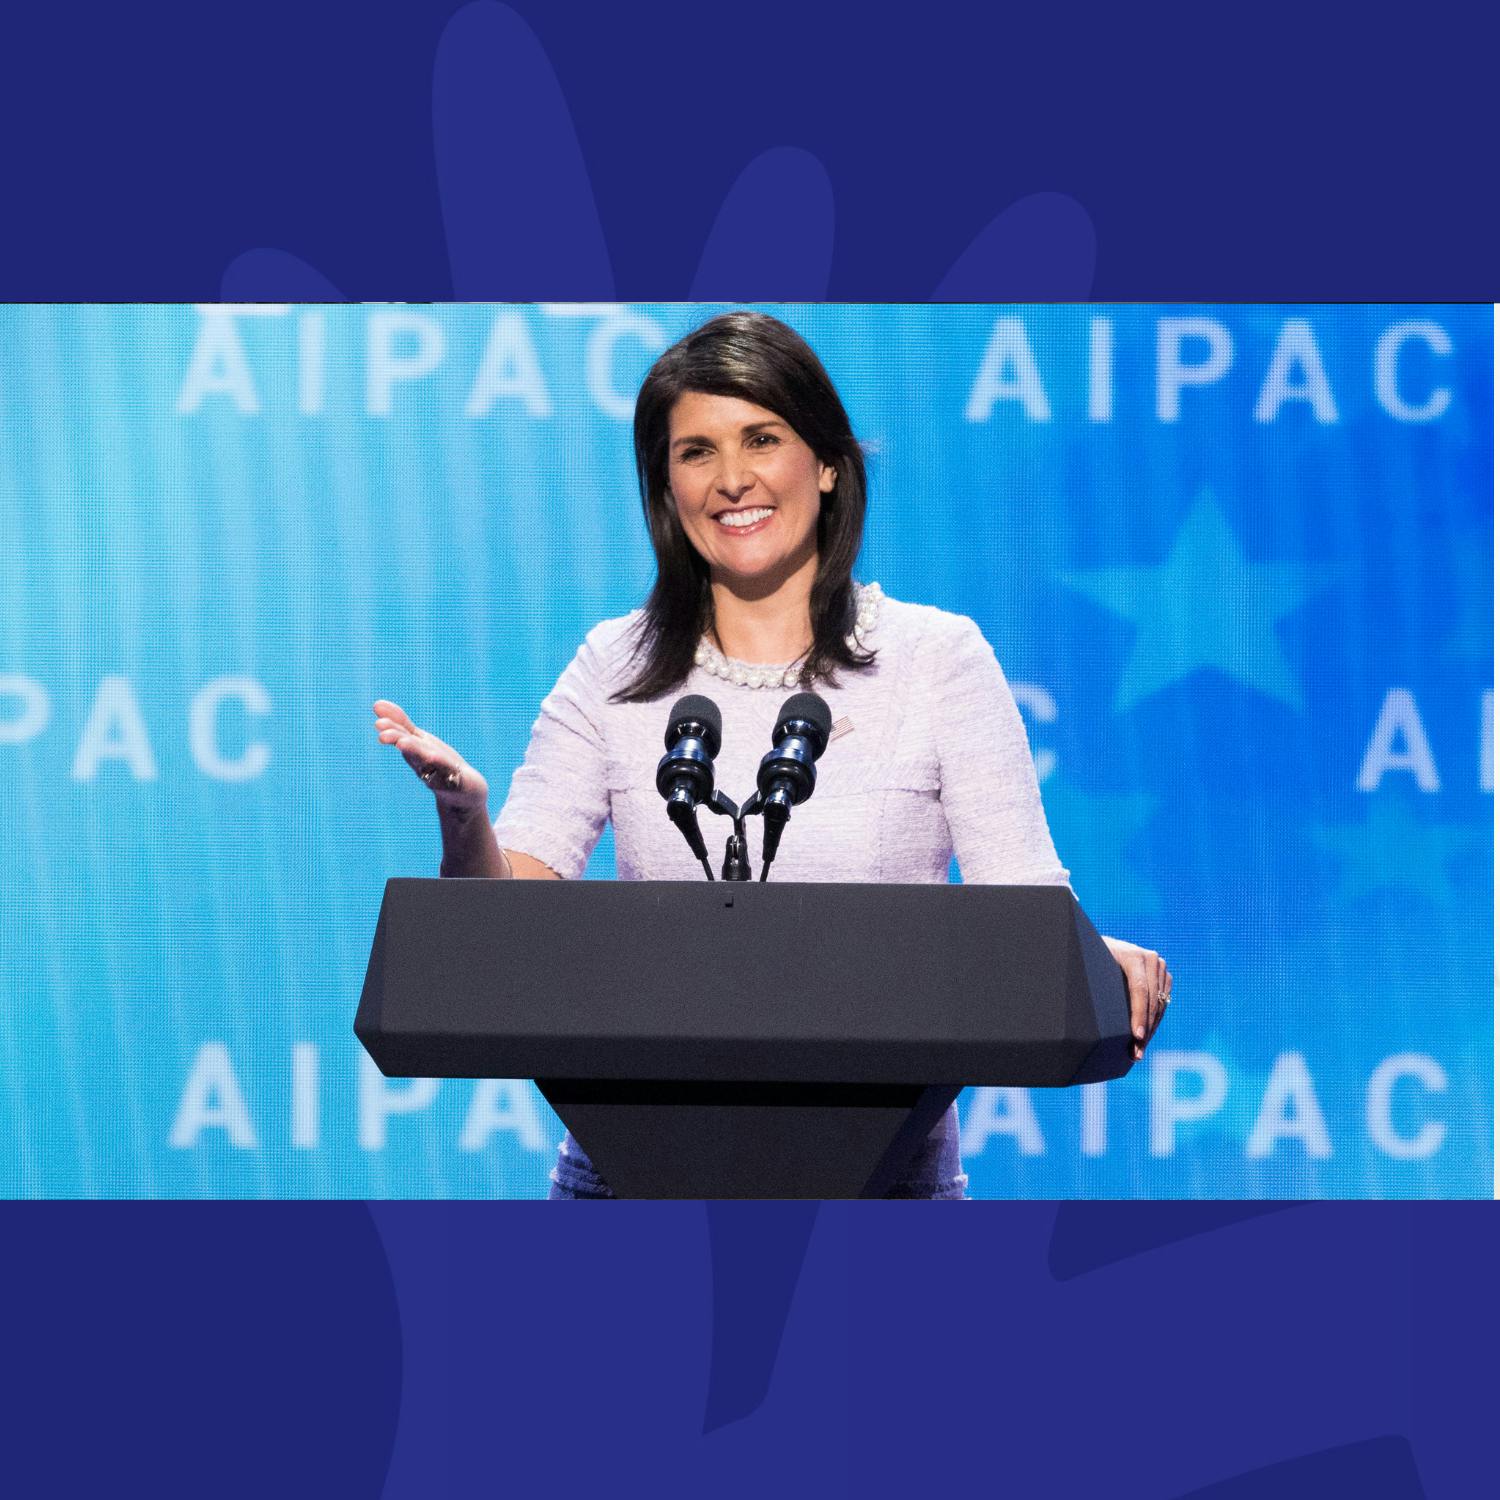 Could Nikki Haley Be The Person To Stop - Or Even Slow - Trump?